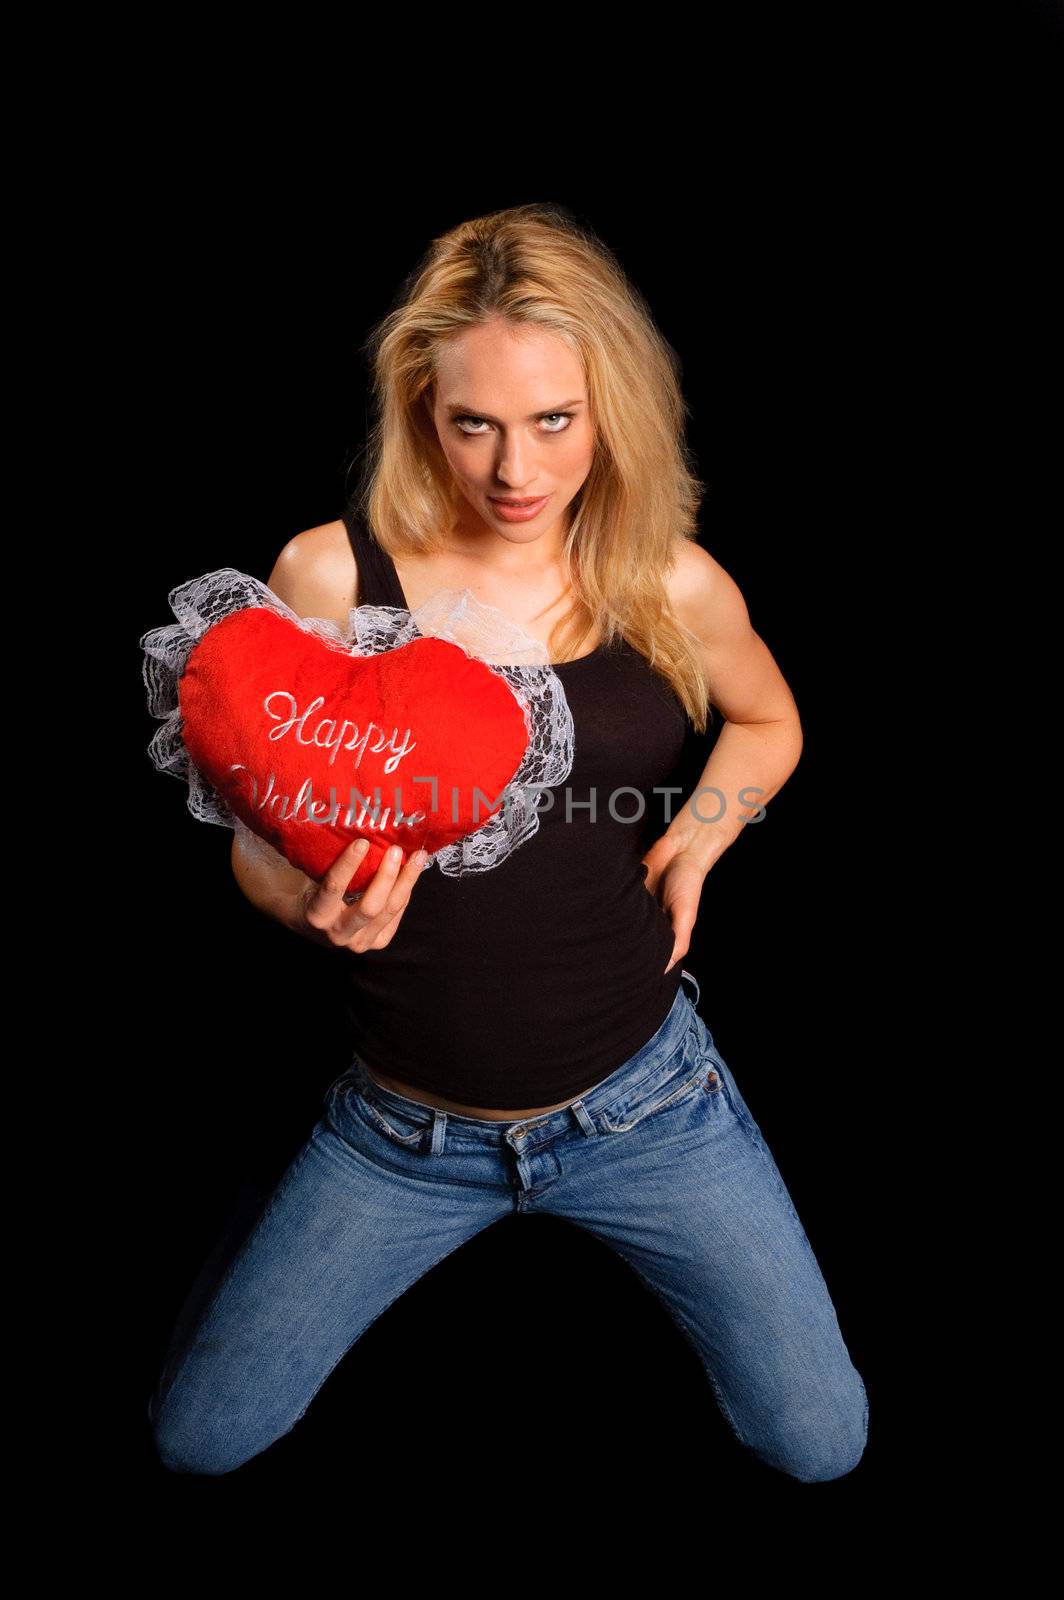 a seductive young woman in blue jeans kneeling while holding a red pillow which has Happy Valentine on it.